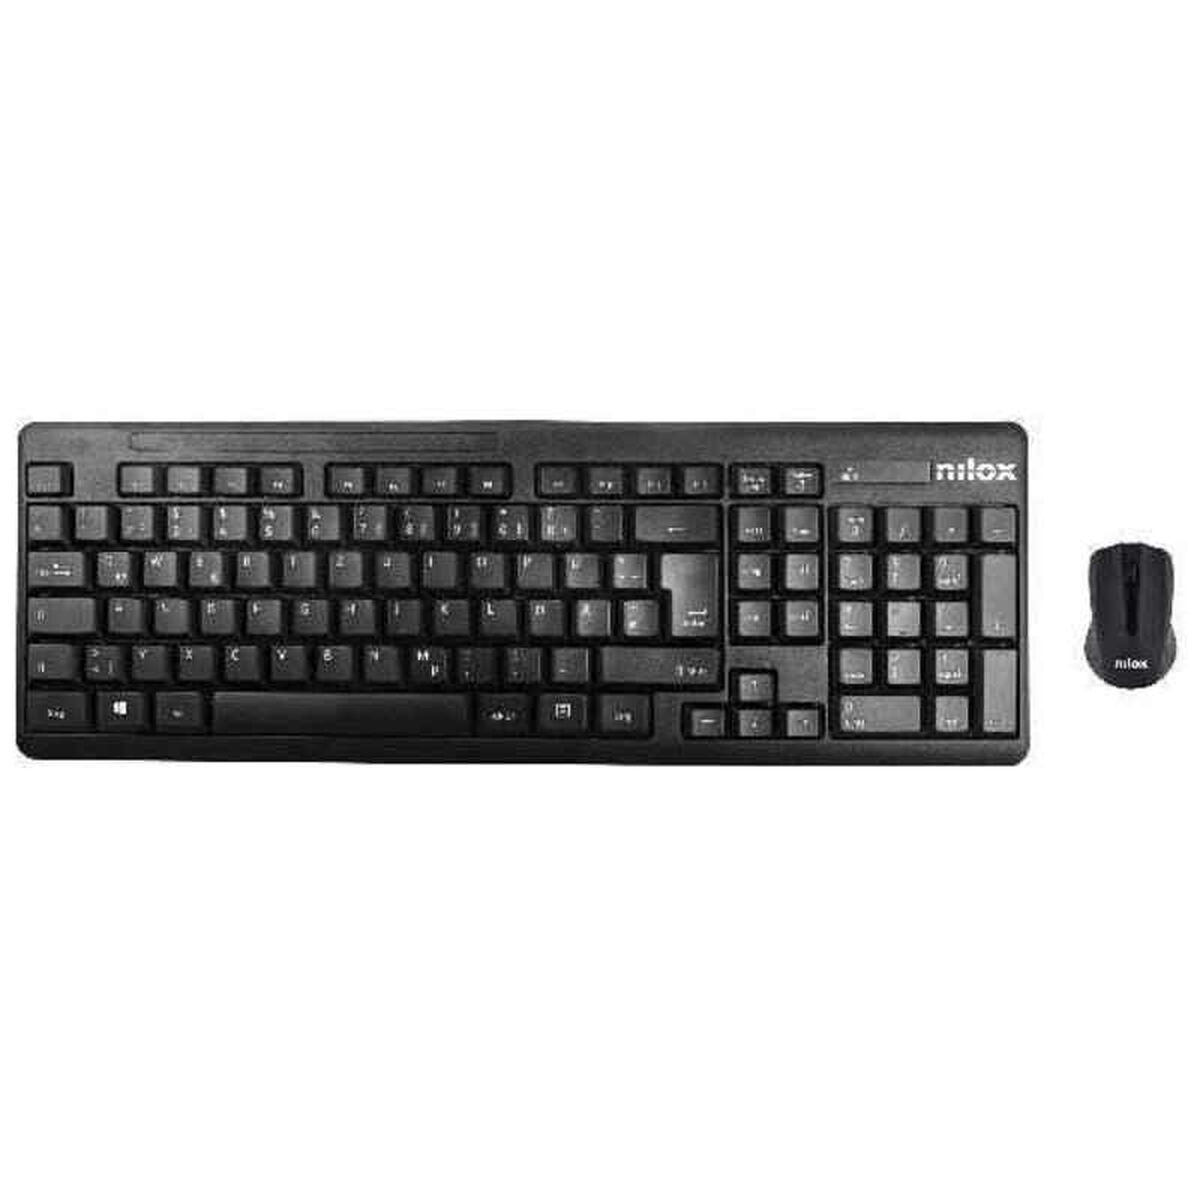 Keyboard and Mouse Nilox Wireless Black